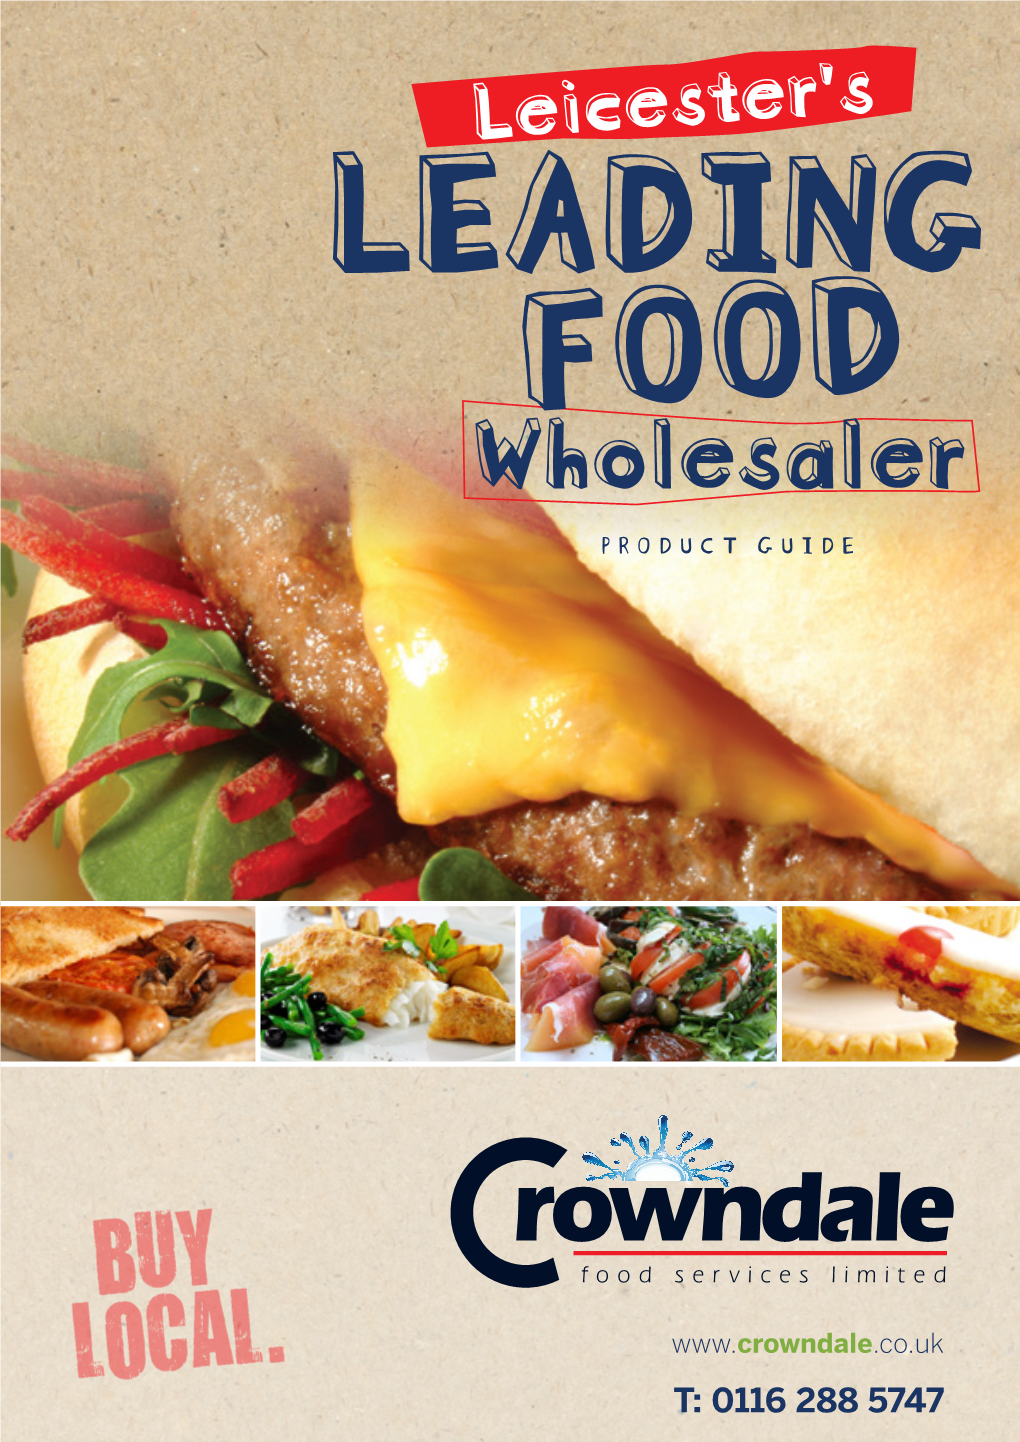 Wholesaler PRODUCT GUIDE